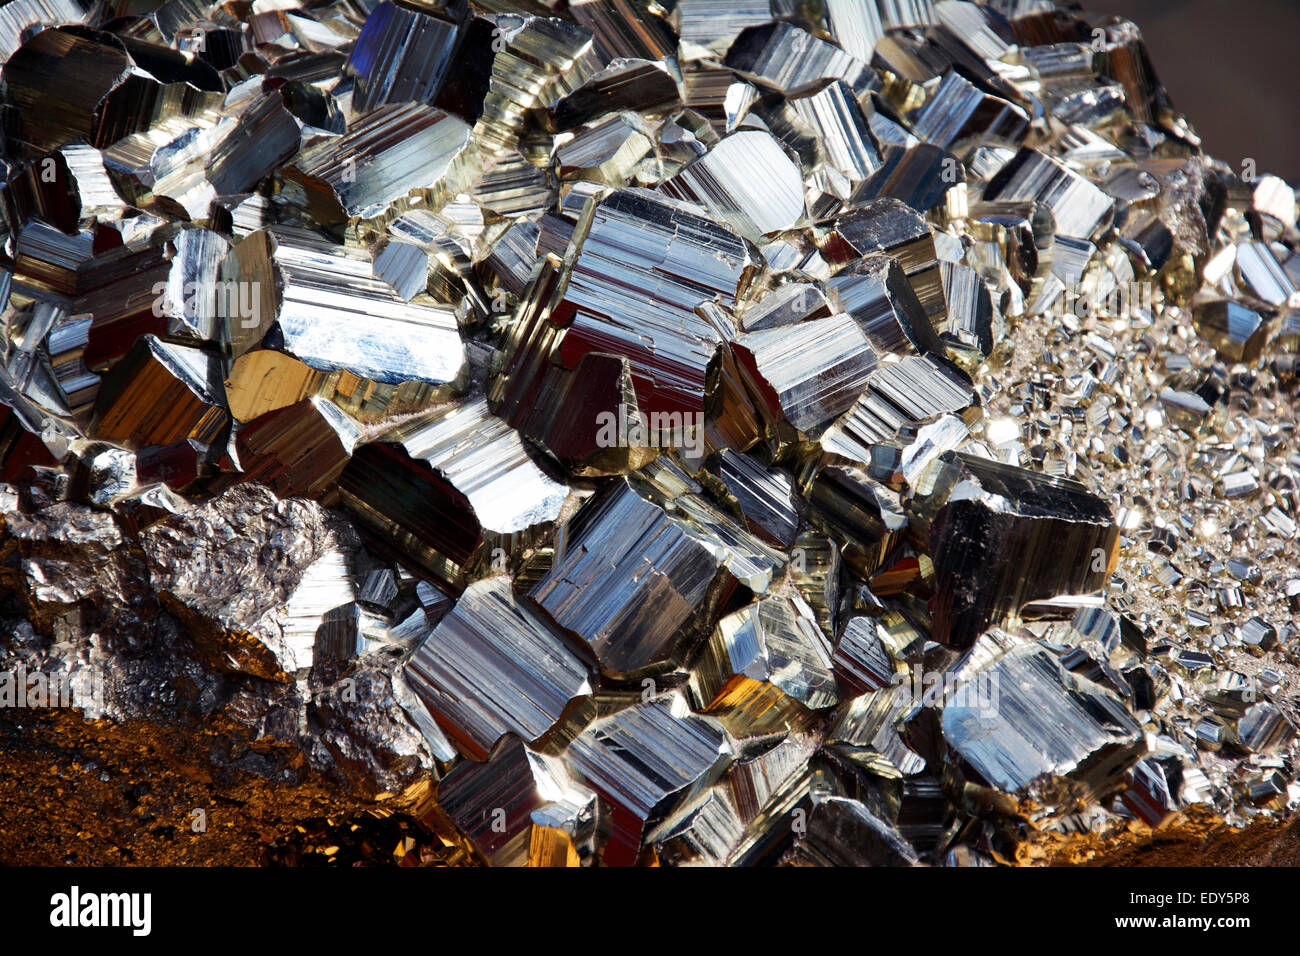 Large pyrite crystals, also called fool's gold. Stock Photo